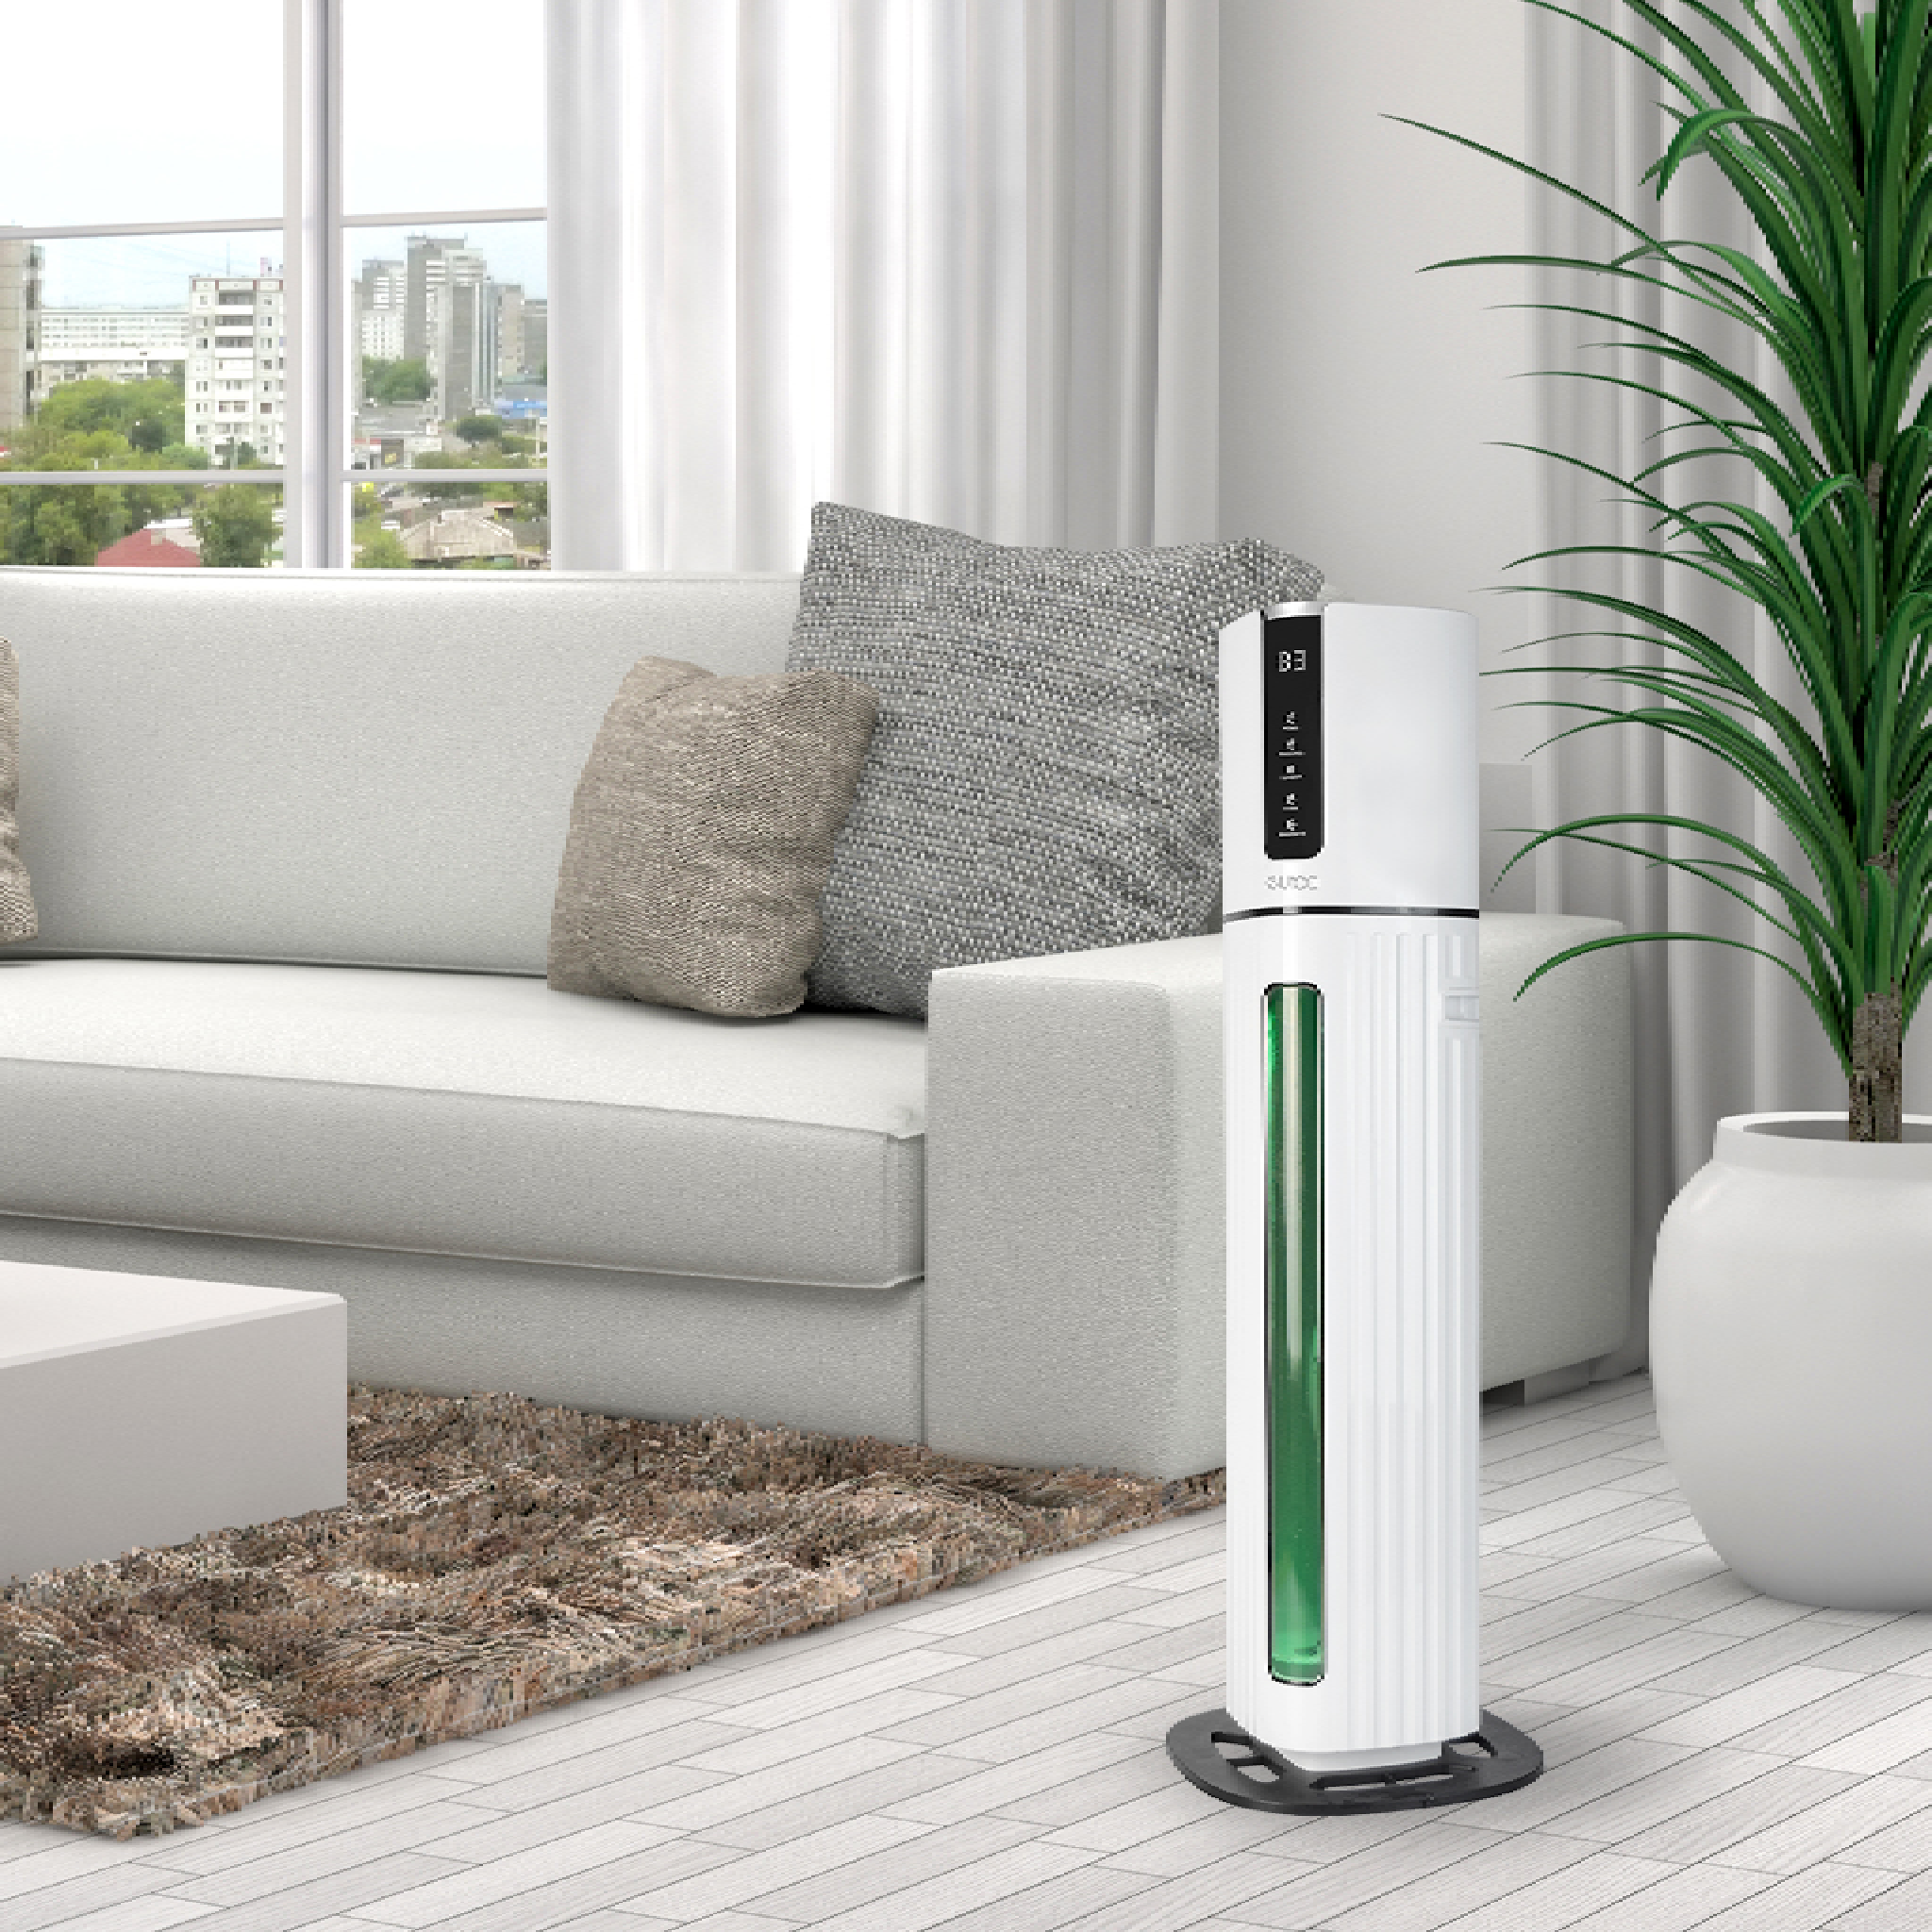 EUROO EHS-12UH21 3-in-1 UV Tower Humidifier